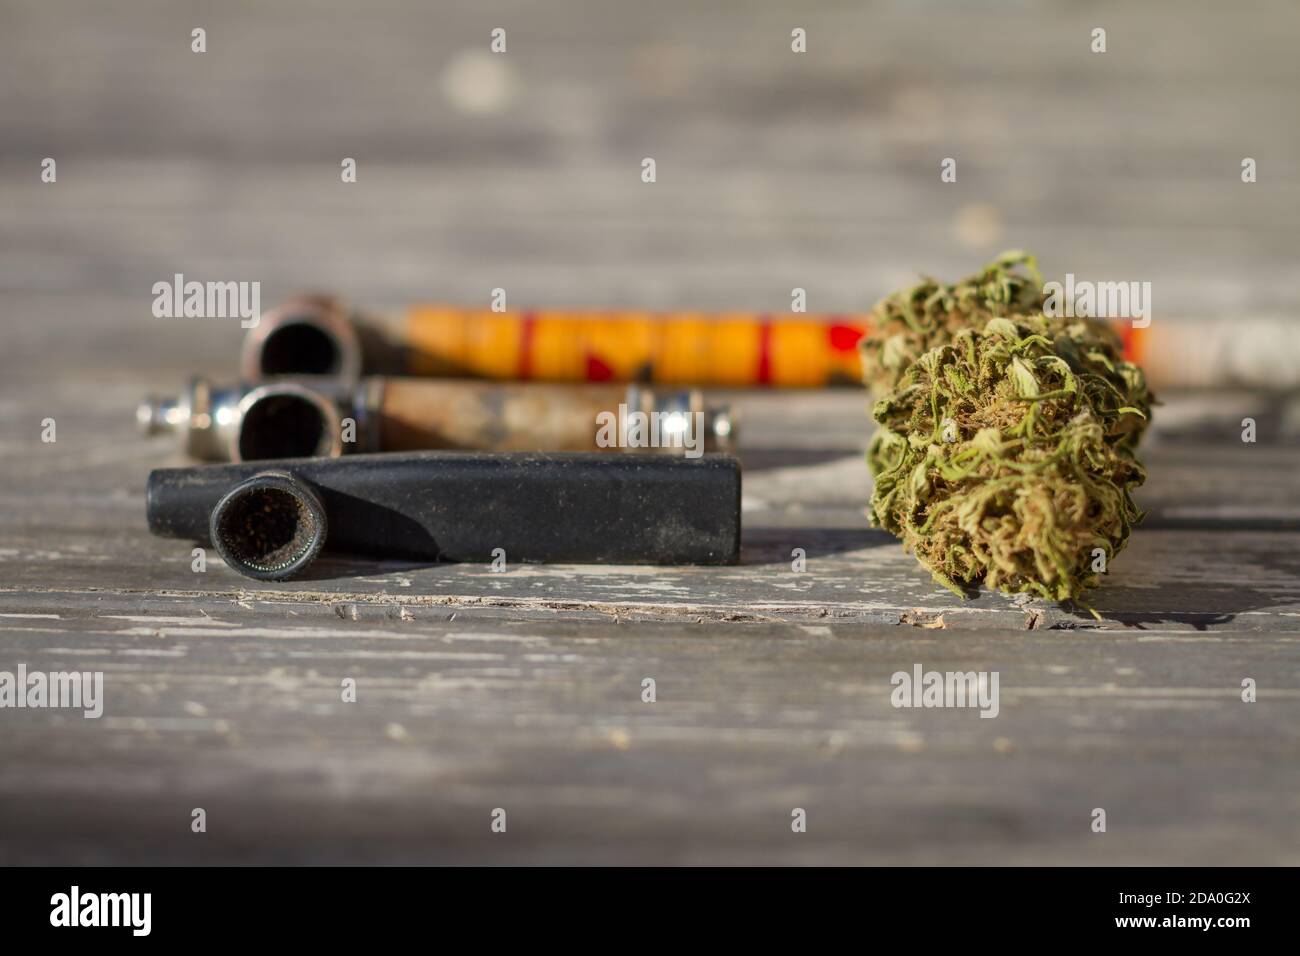 Marijuana bud with smoking pipes in the background. Stock Photo